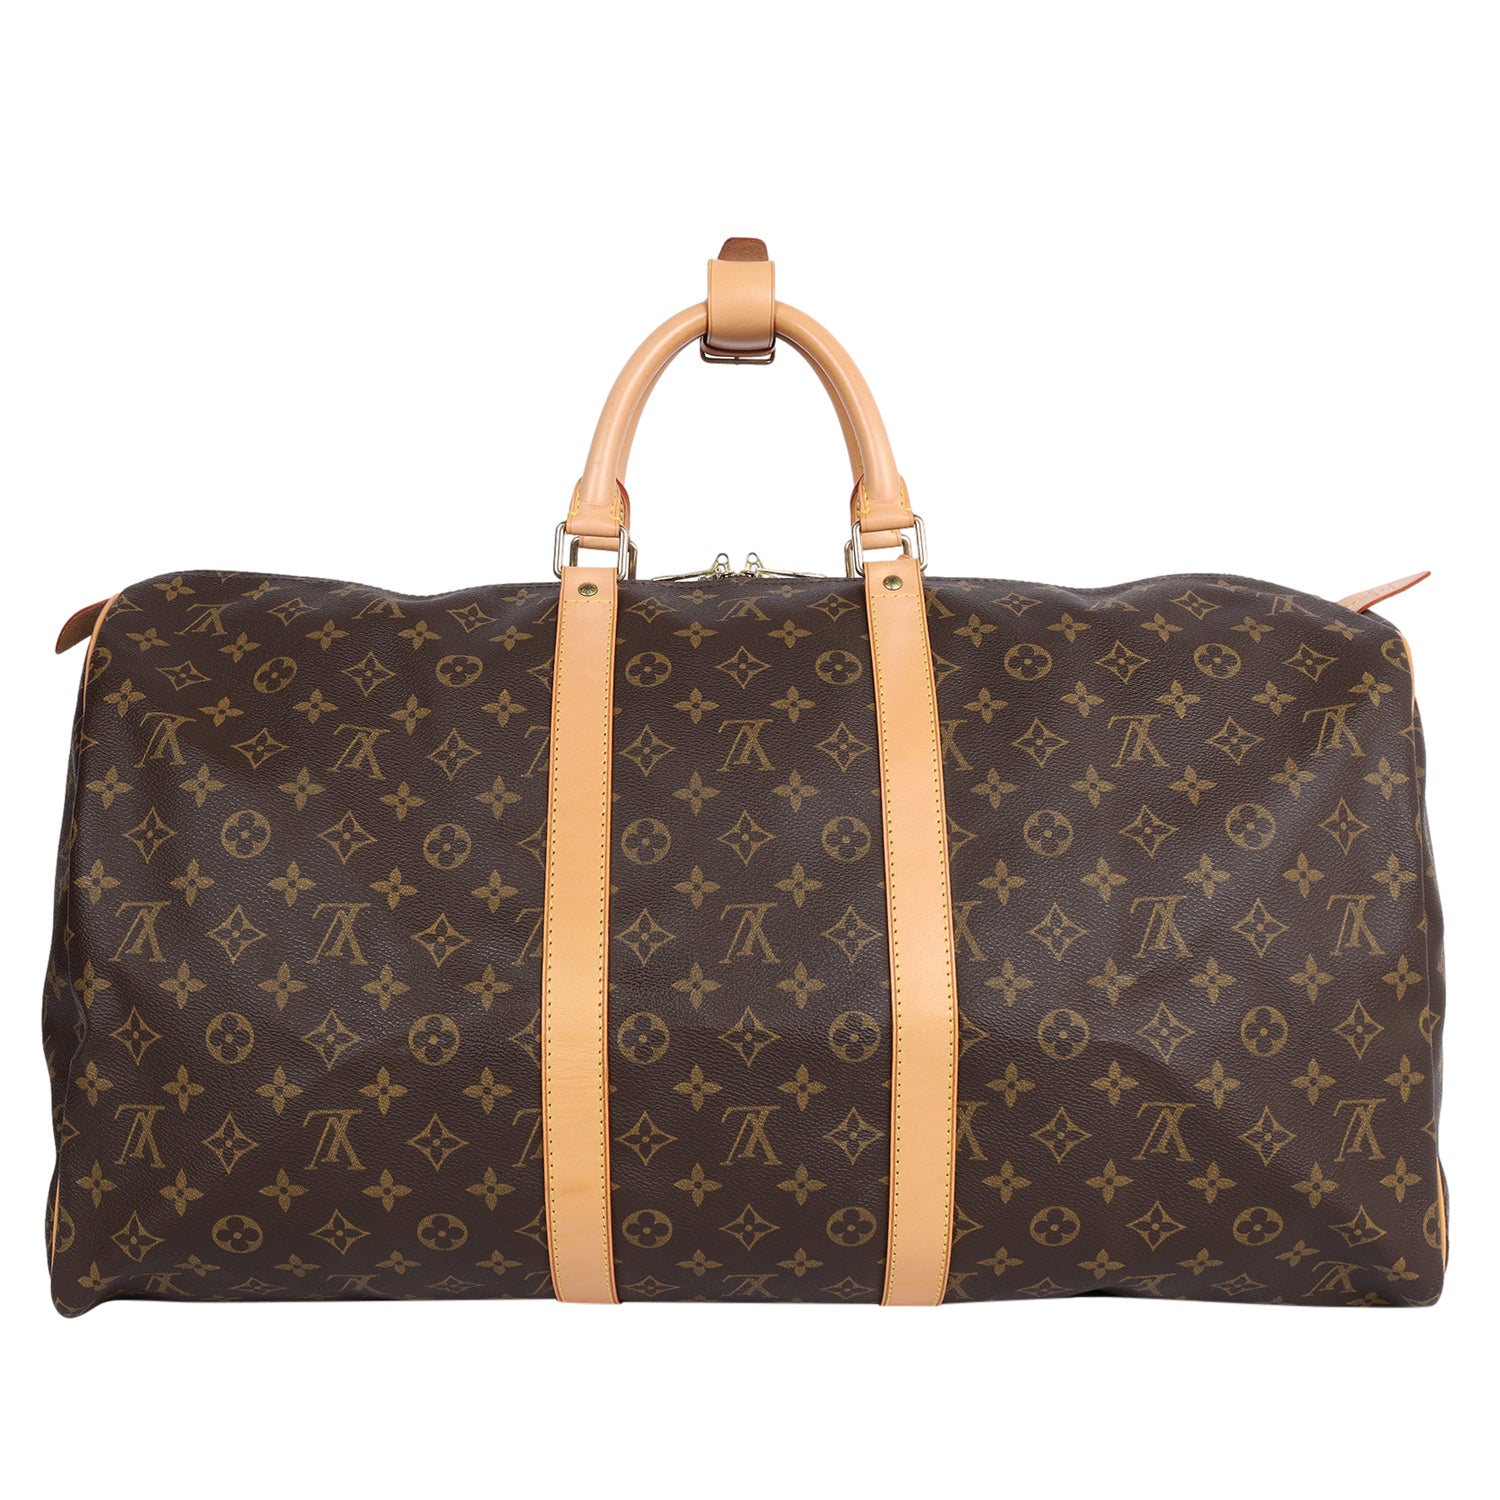 Louis Vuitton Keepall 45 Travel Bag in Gold EPI Leather